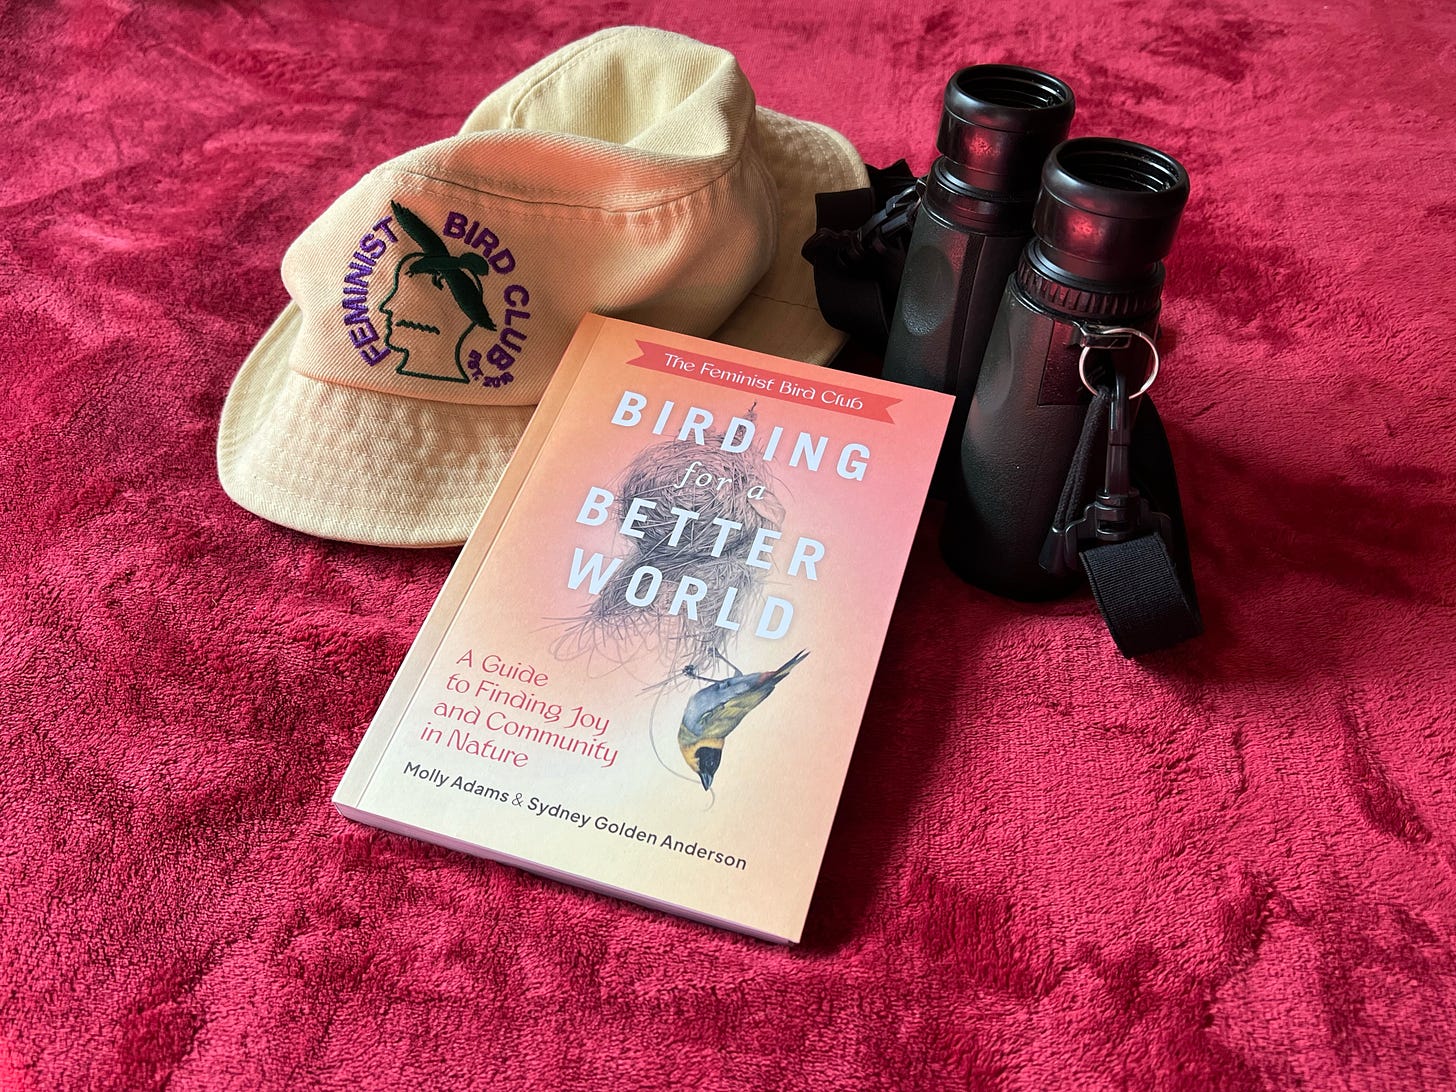 a photo of the book "birding for a better world" on a red surface with a tan bucket hat that says "feminist bird club" and a pair of binoculars.